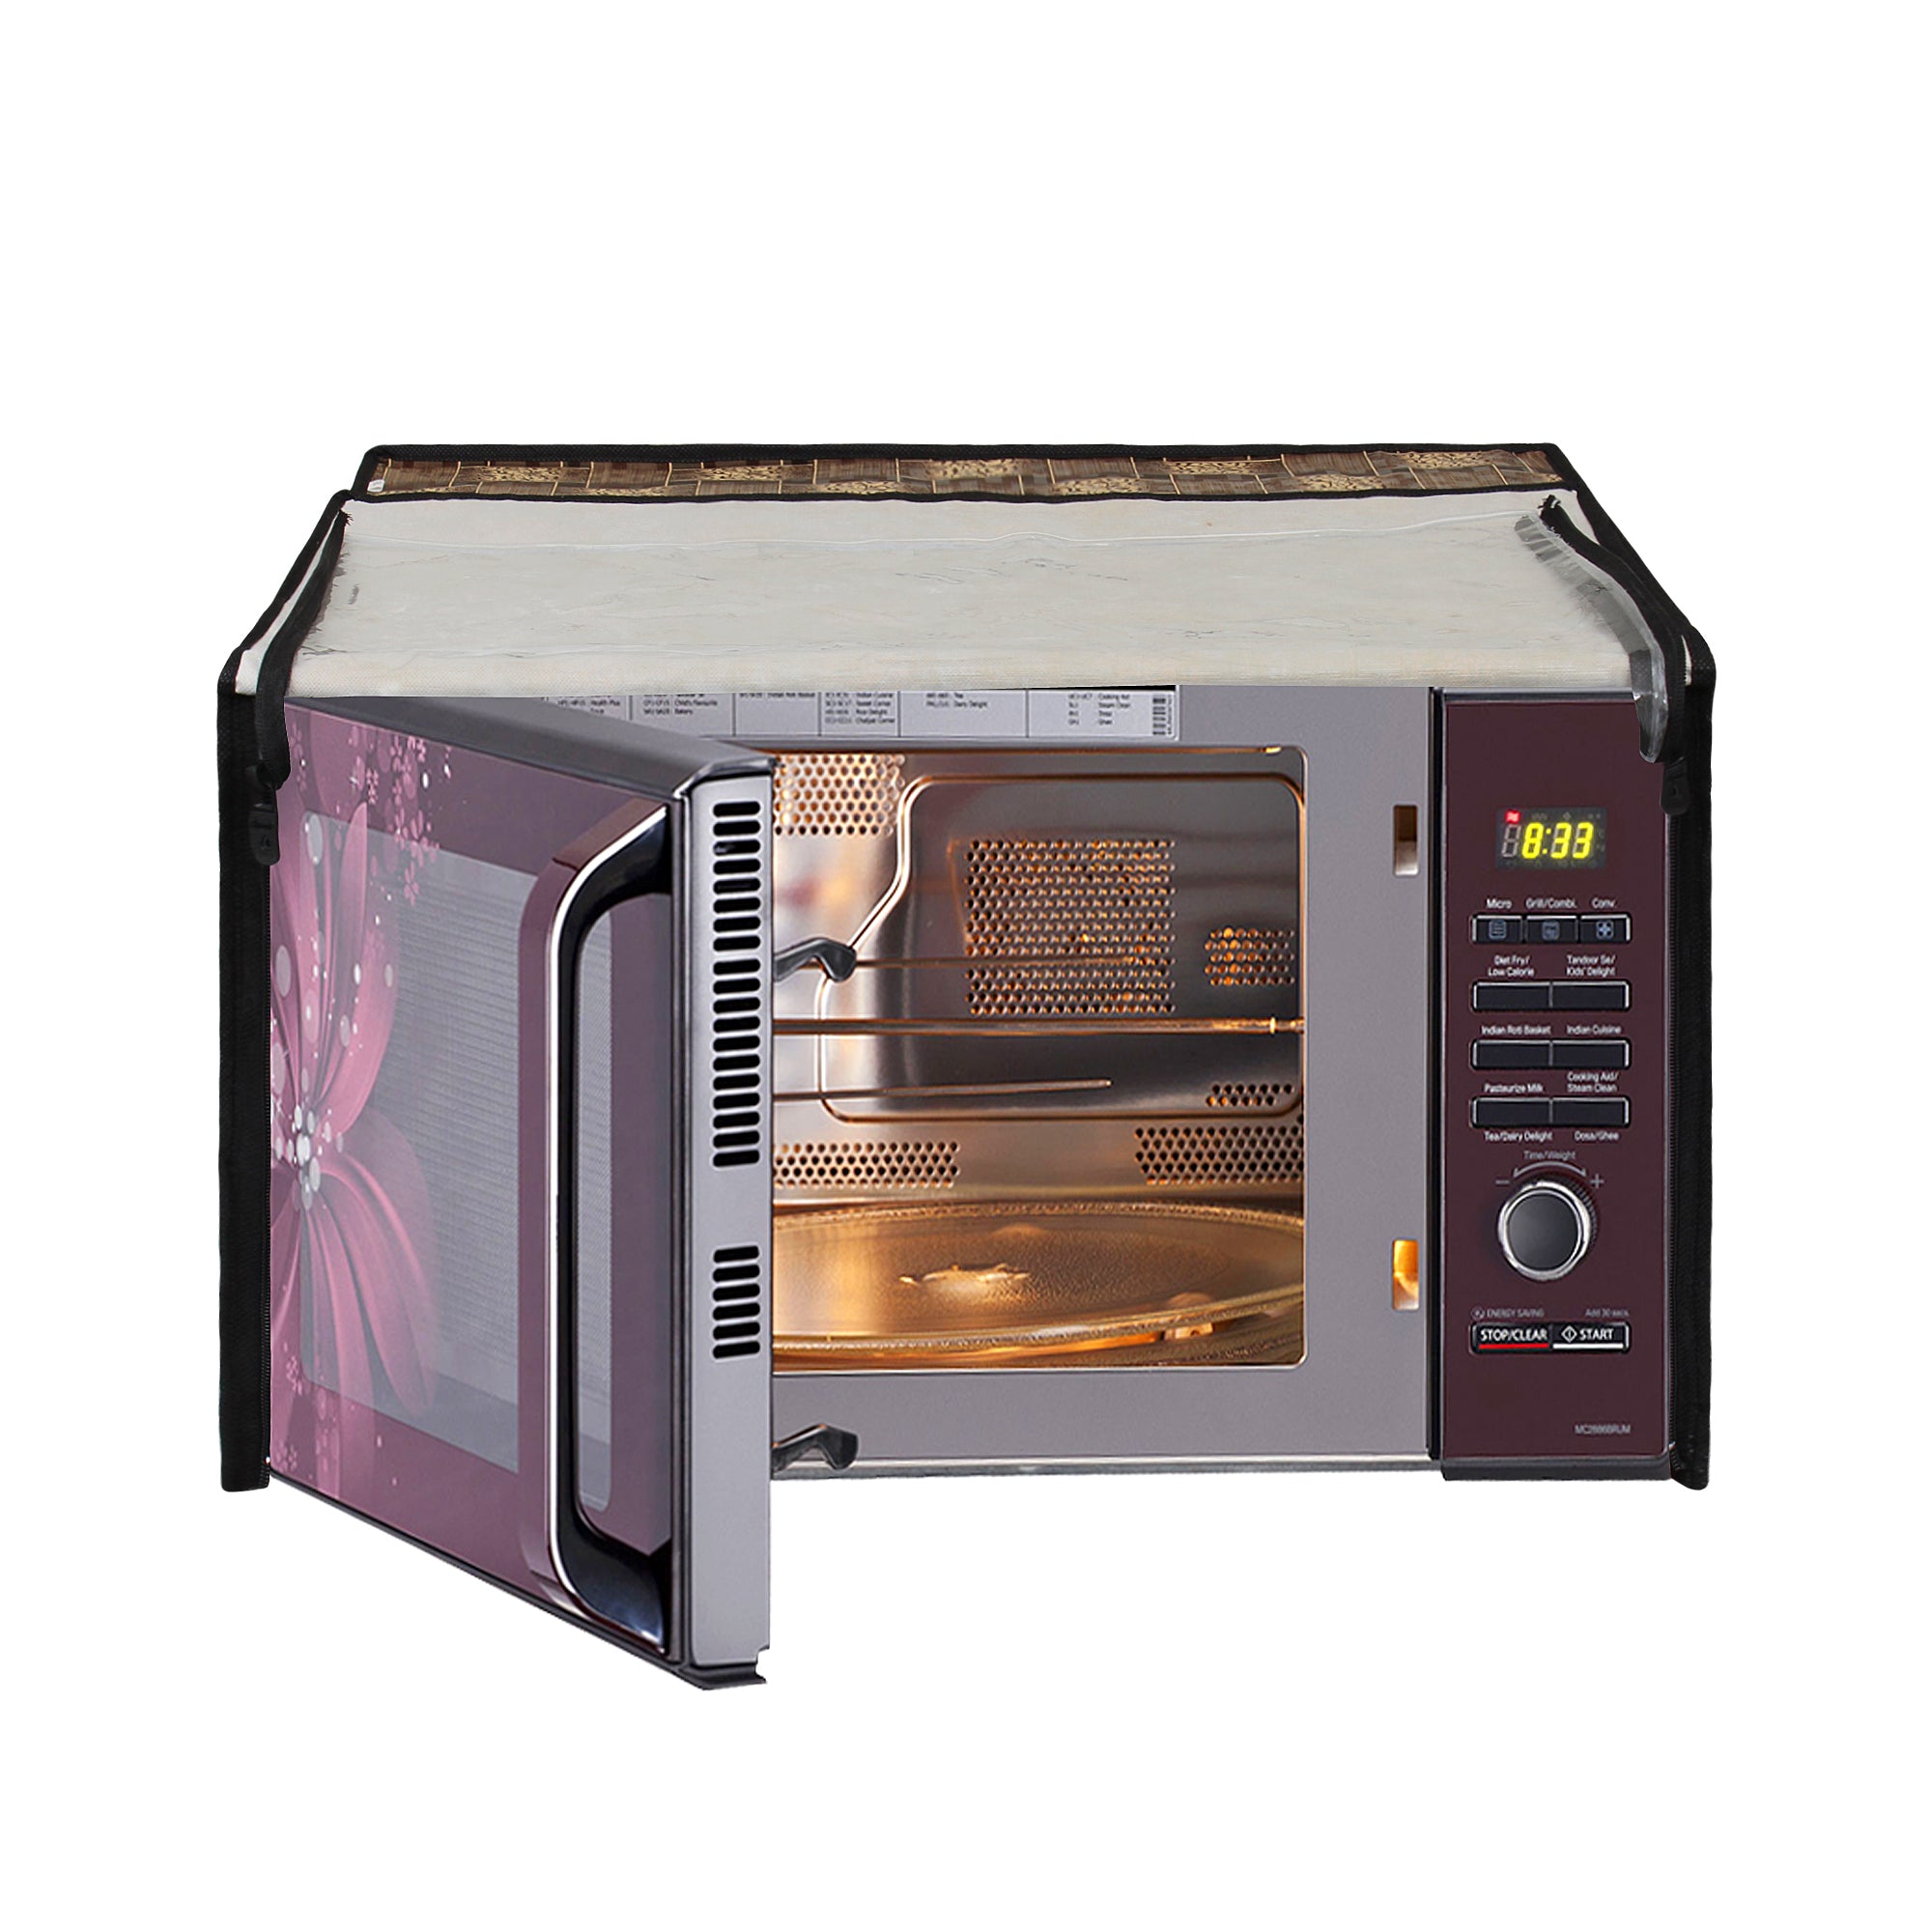 Microwave Oven Cover With Adjustable Front Zipper, SA40 - Dream Care Furnishings Private Limited